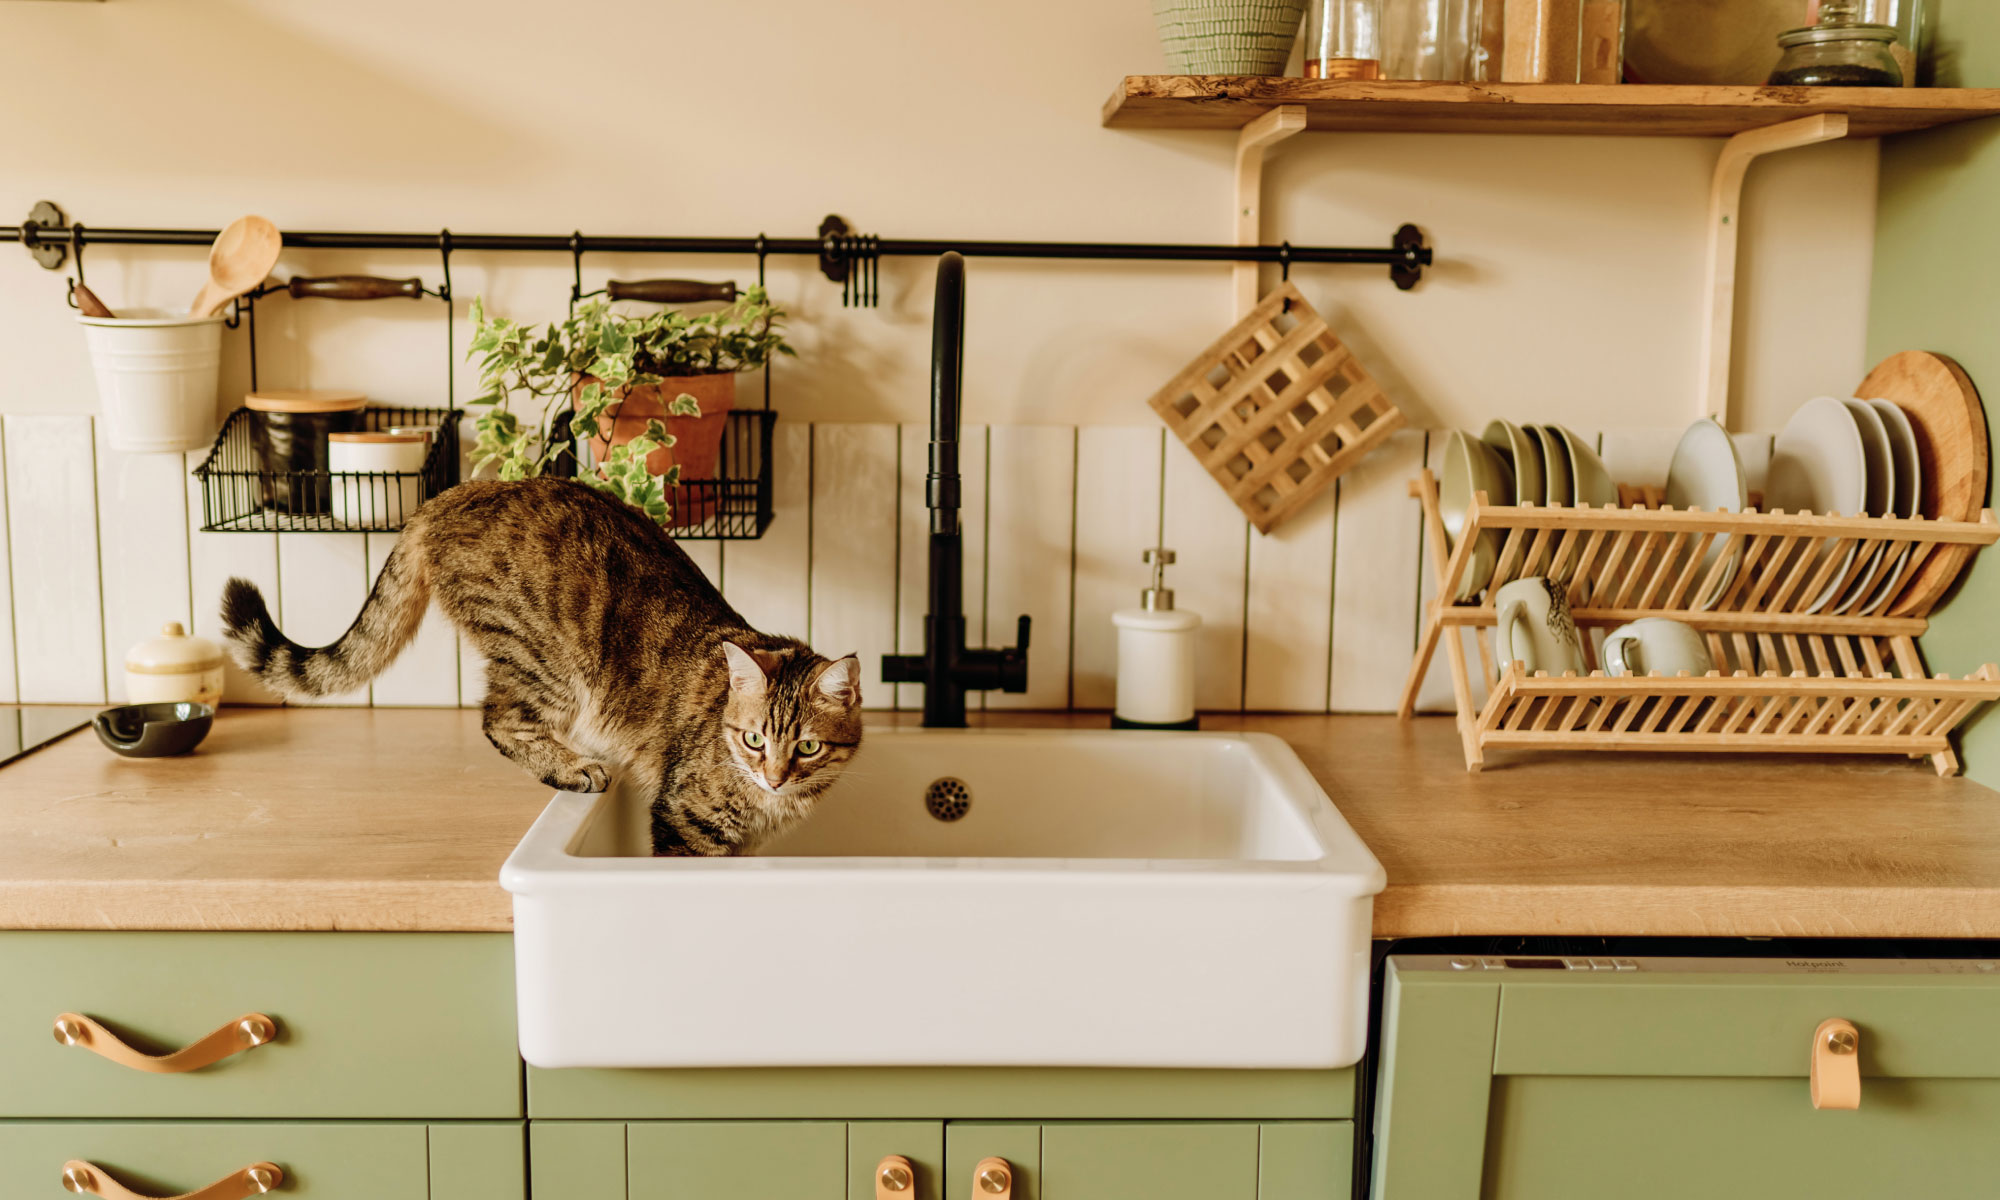 Adult tabby cat climbing into the sink in an olive green kitchen.